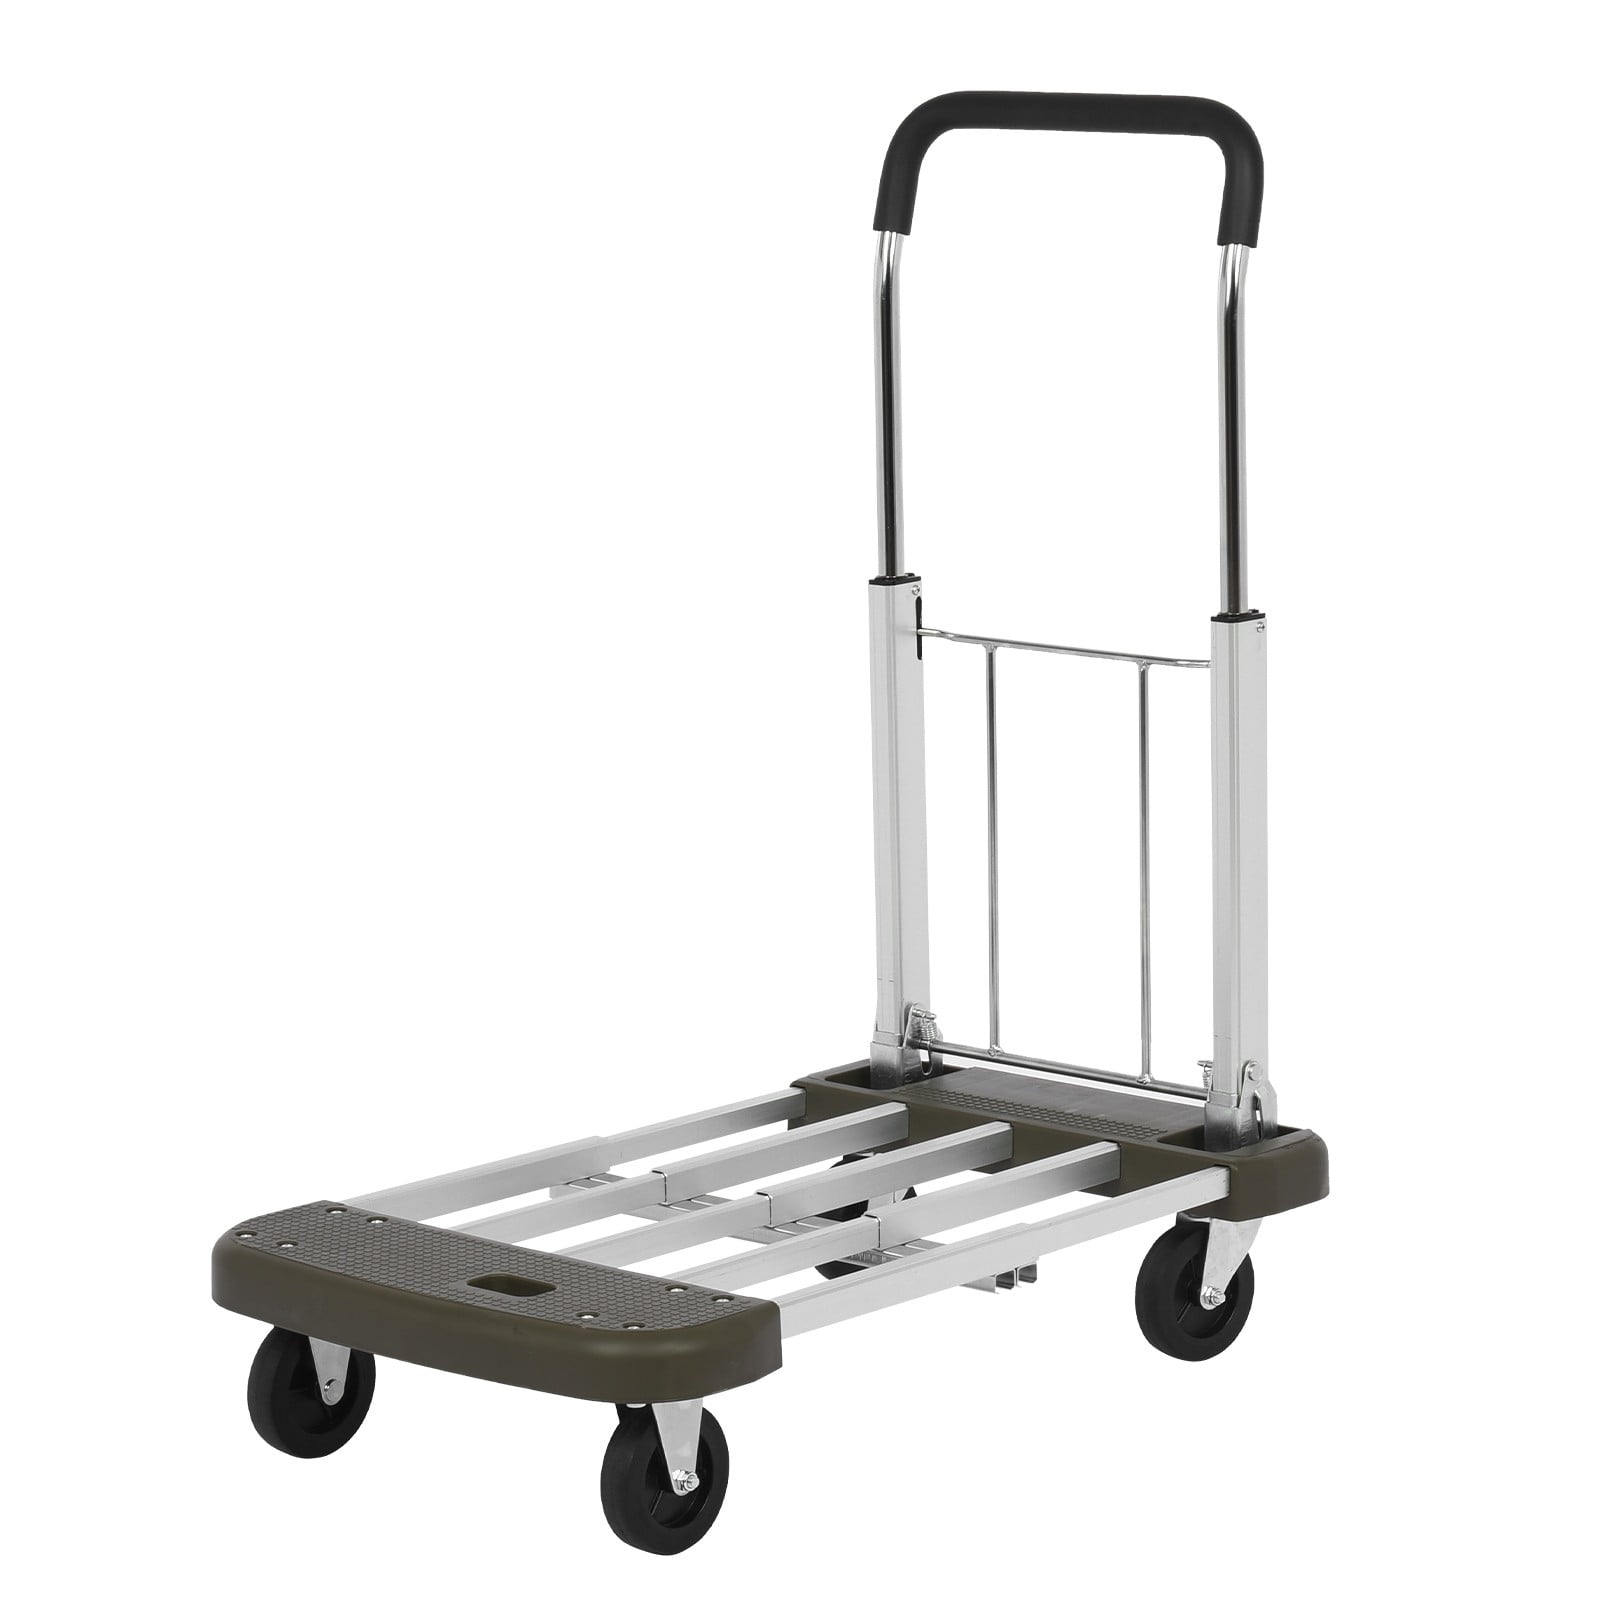 Shopping Trolleys Portable Waterproof Oxford Cloth Aluminum Alloy Anti-Skid Wheel Load Capacity Body Personal Suitcases 